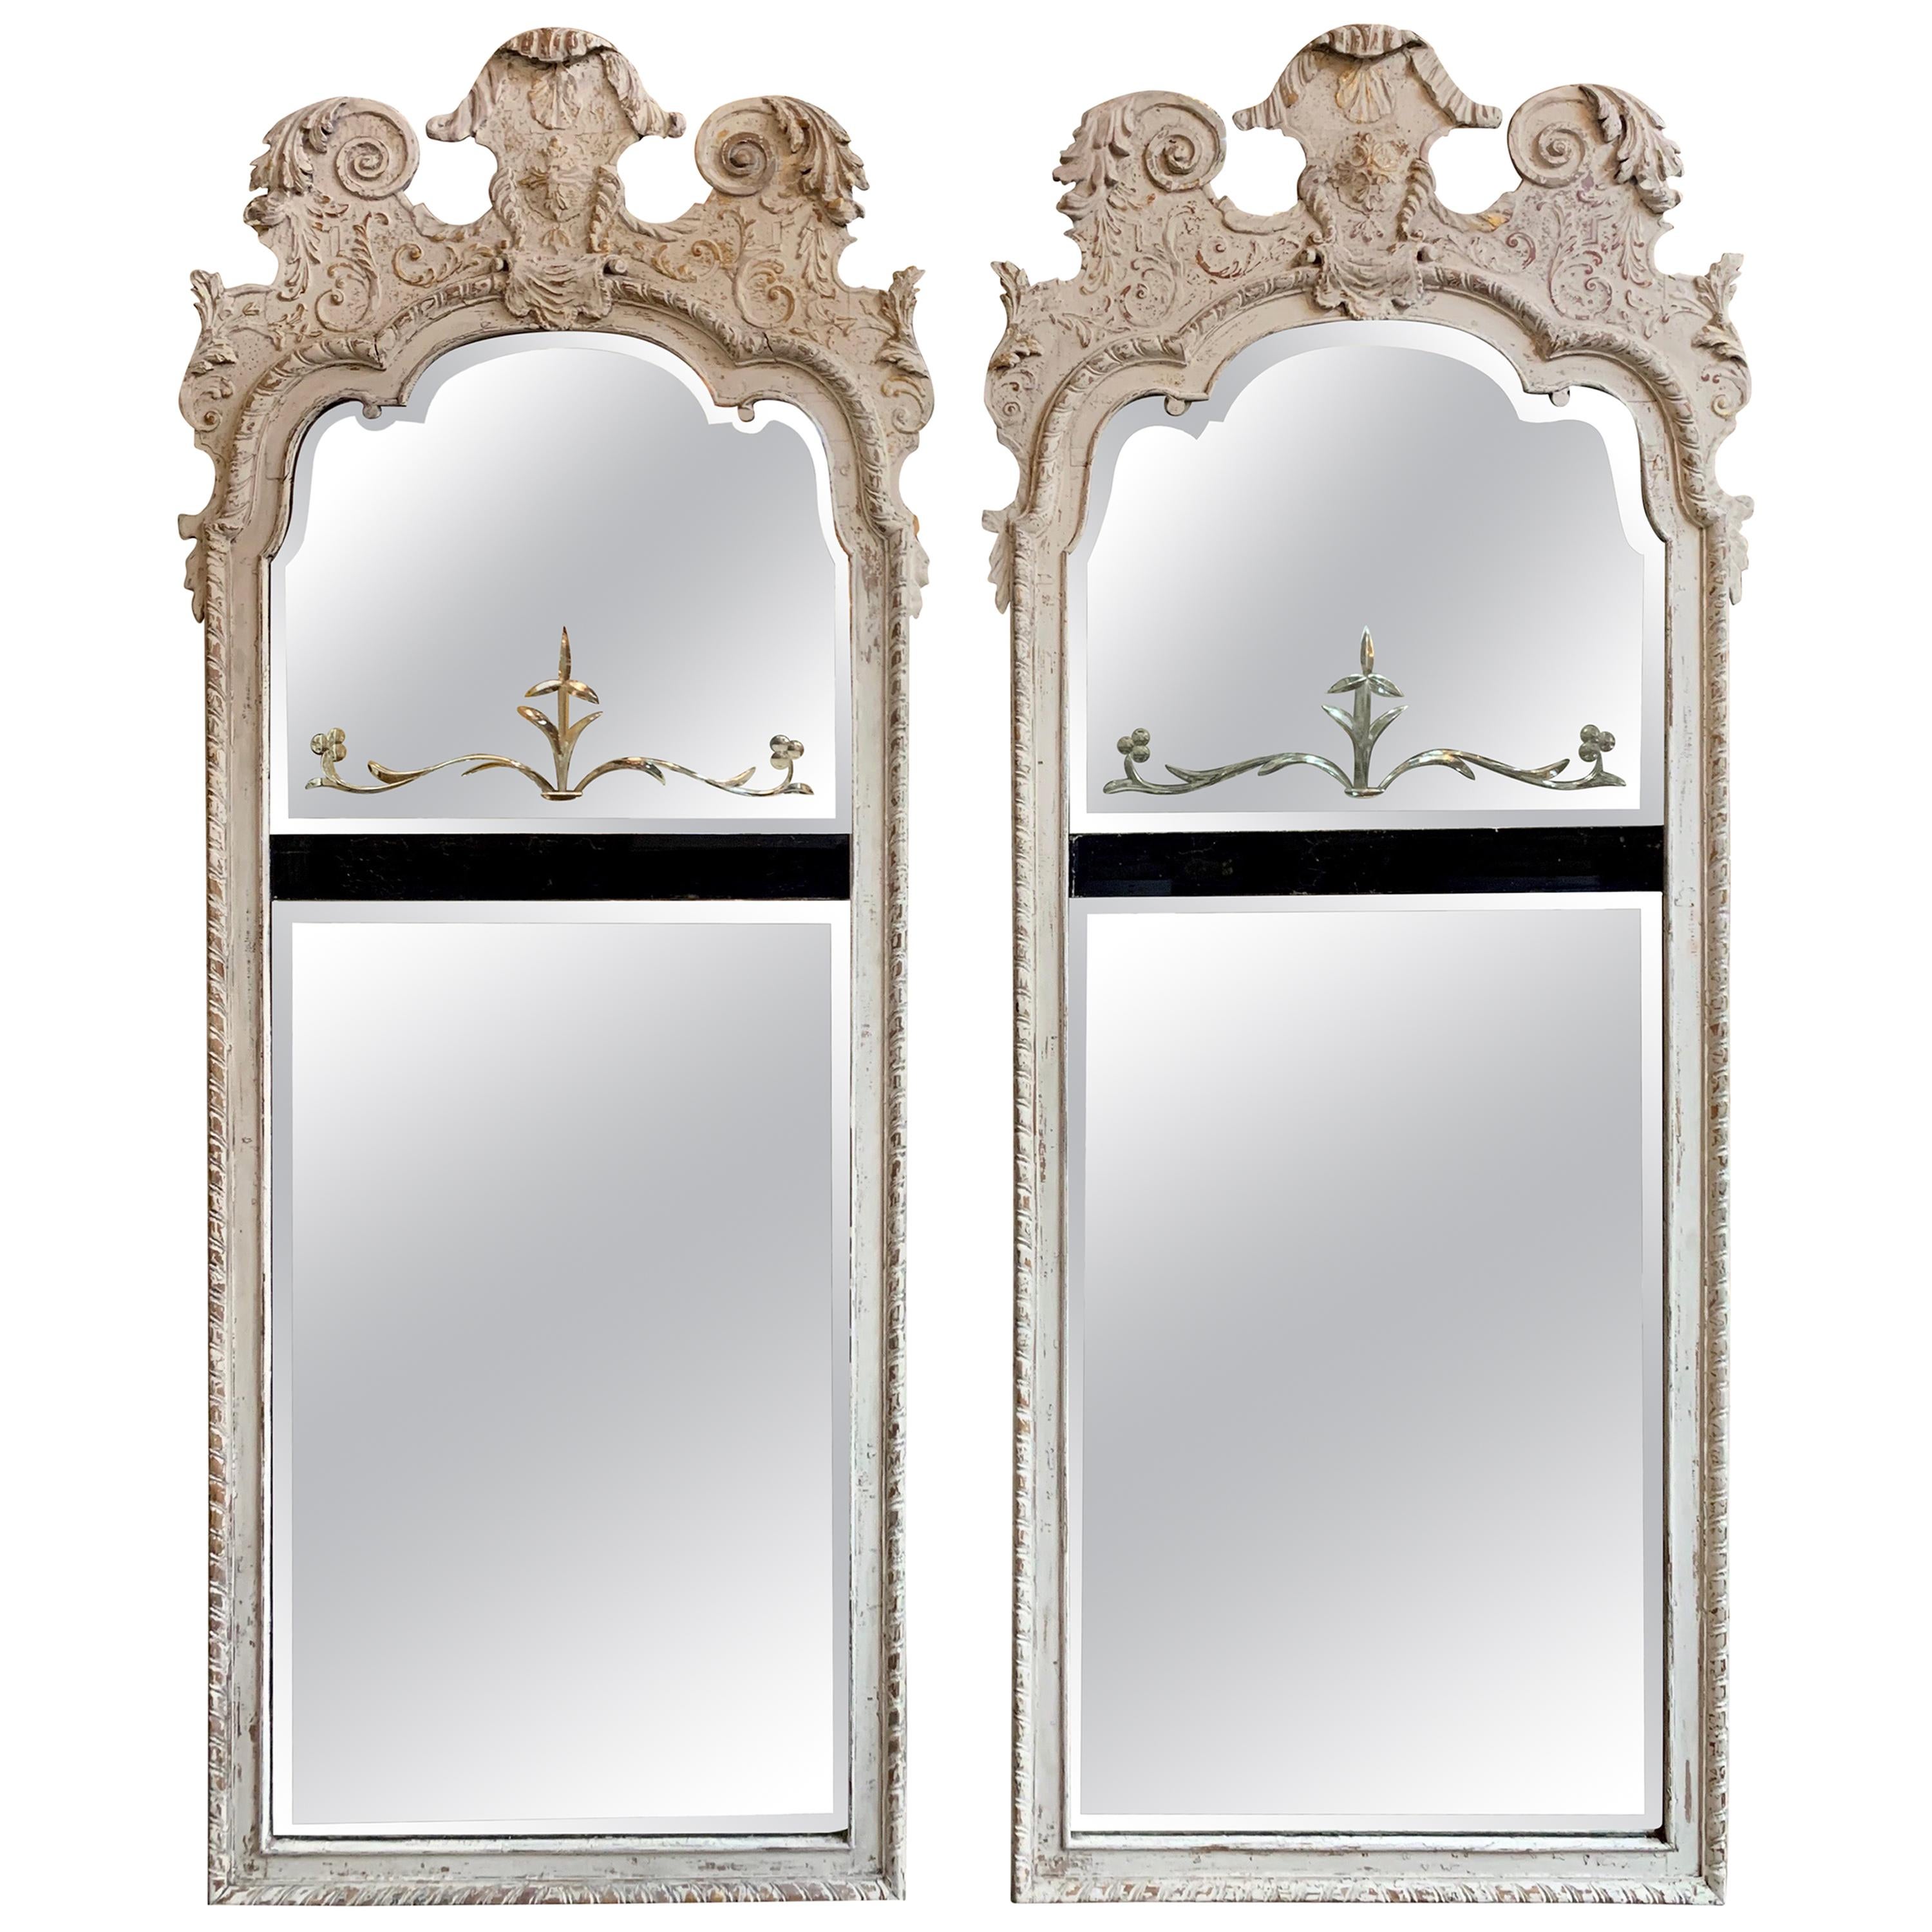 Period English Regency Carved and Painted Mirrors with Divided Glass